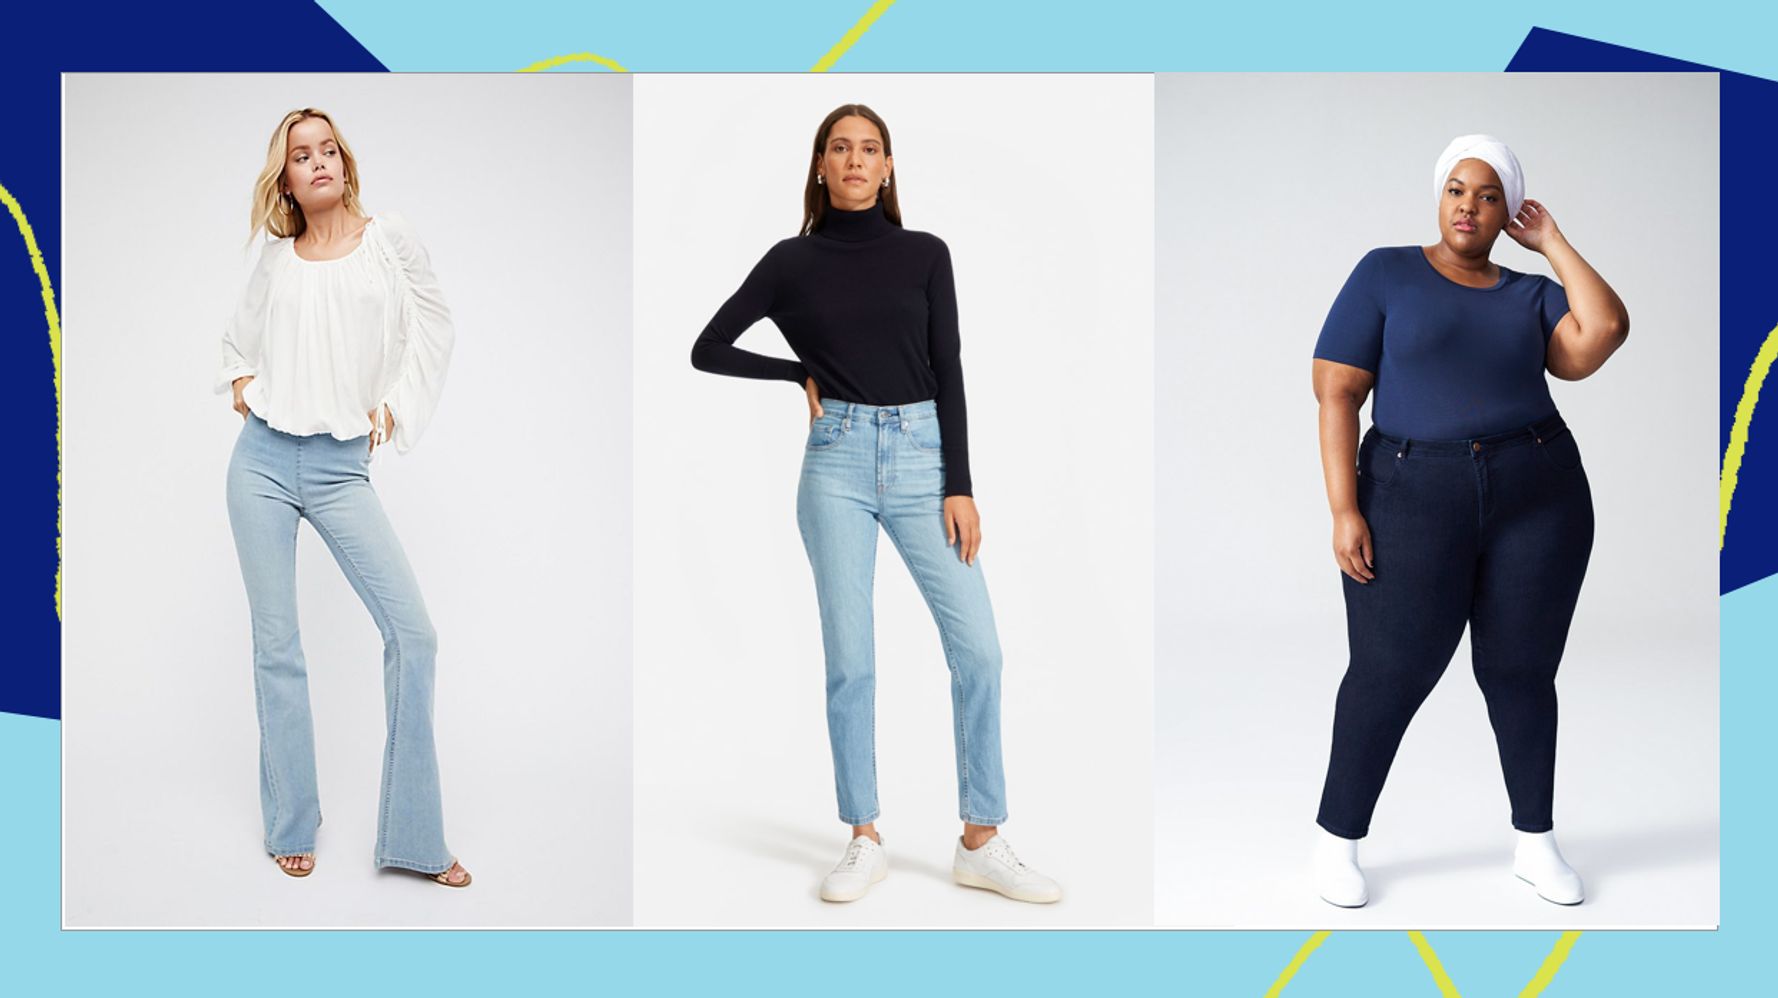 12 Best High-Waisted Jeans for Women, According to Stylists